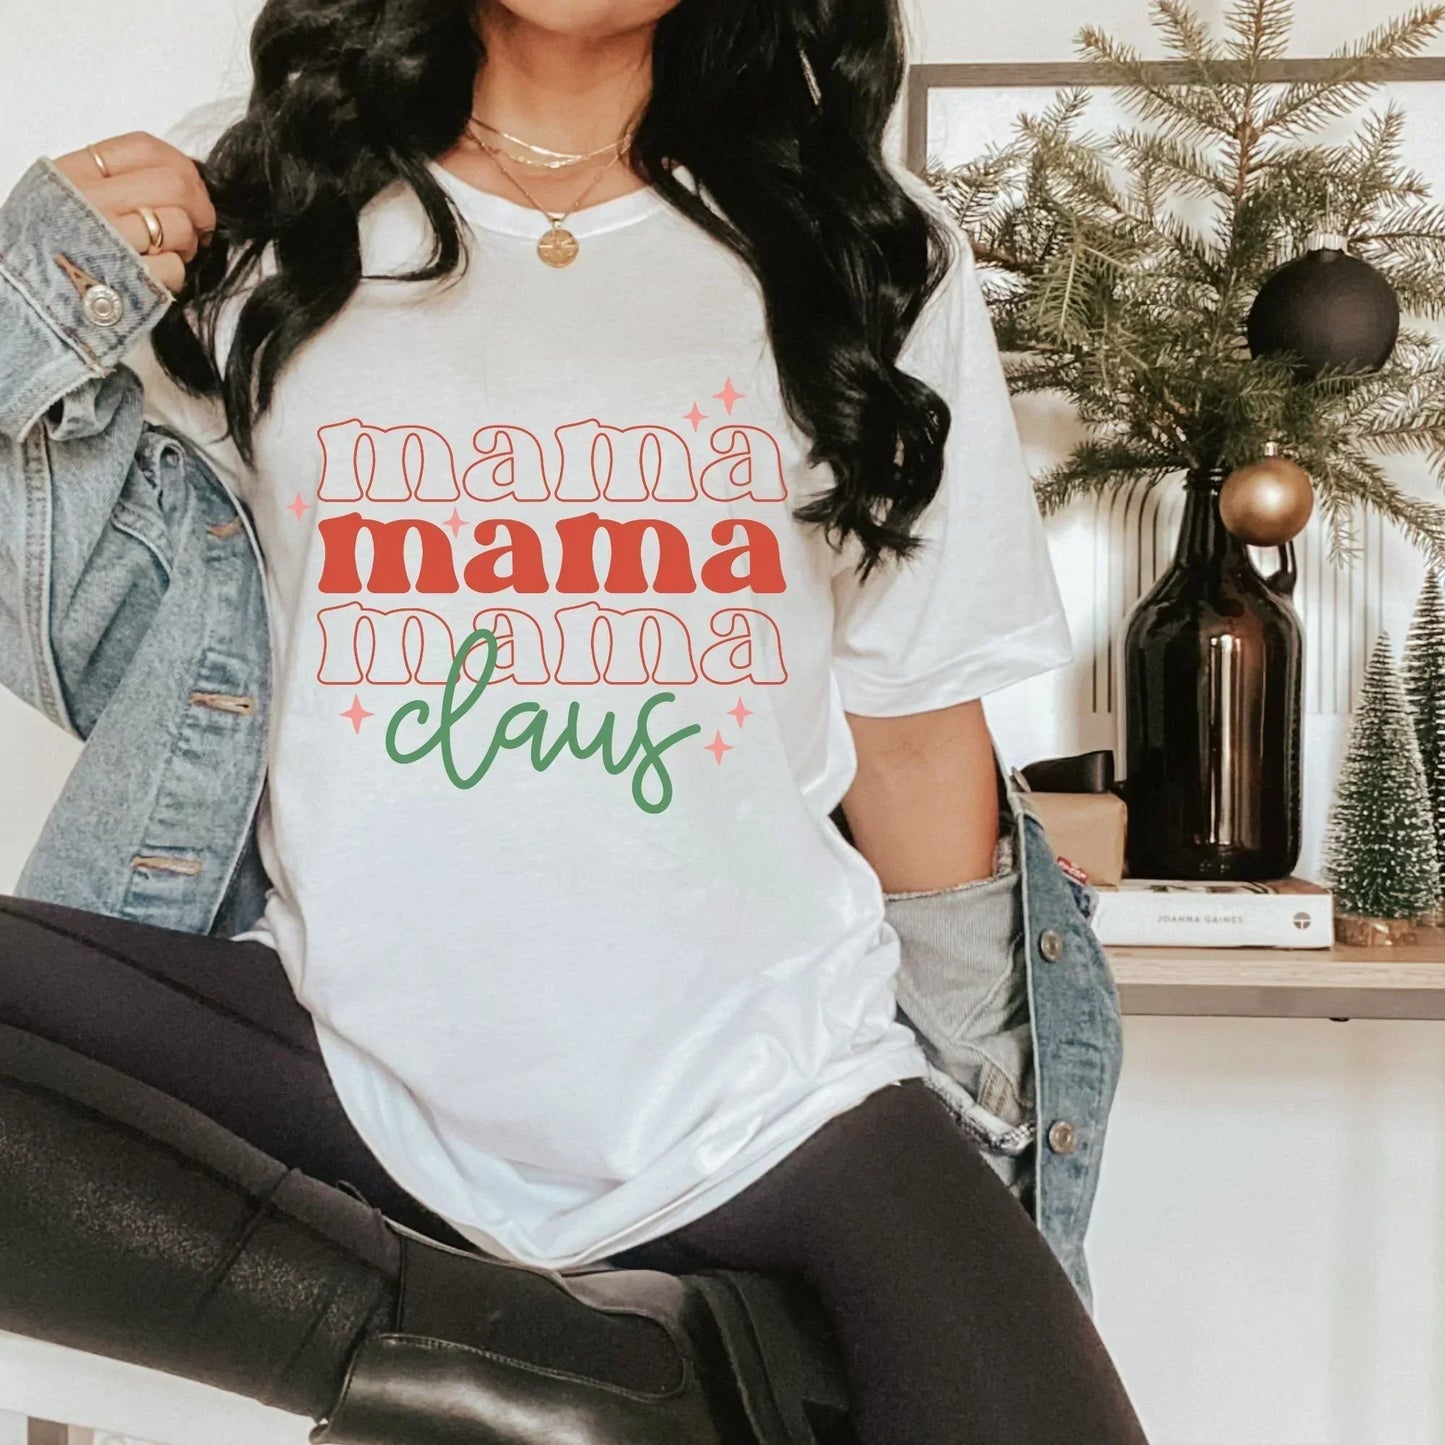 Christmas Family Shirts, Funny Christmas Couples T-shirt, Cookie Baking Crew Xmas Tee, Matching Family Holiday Photos, Merry Christmas Gifts HMDesignStudioUS